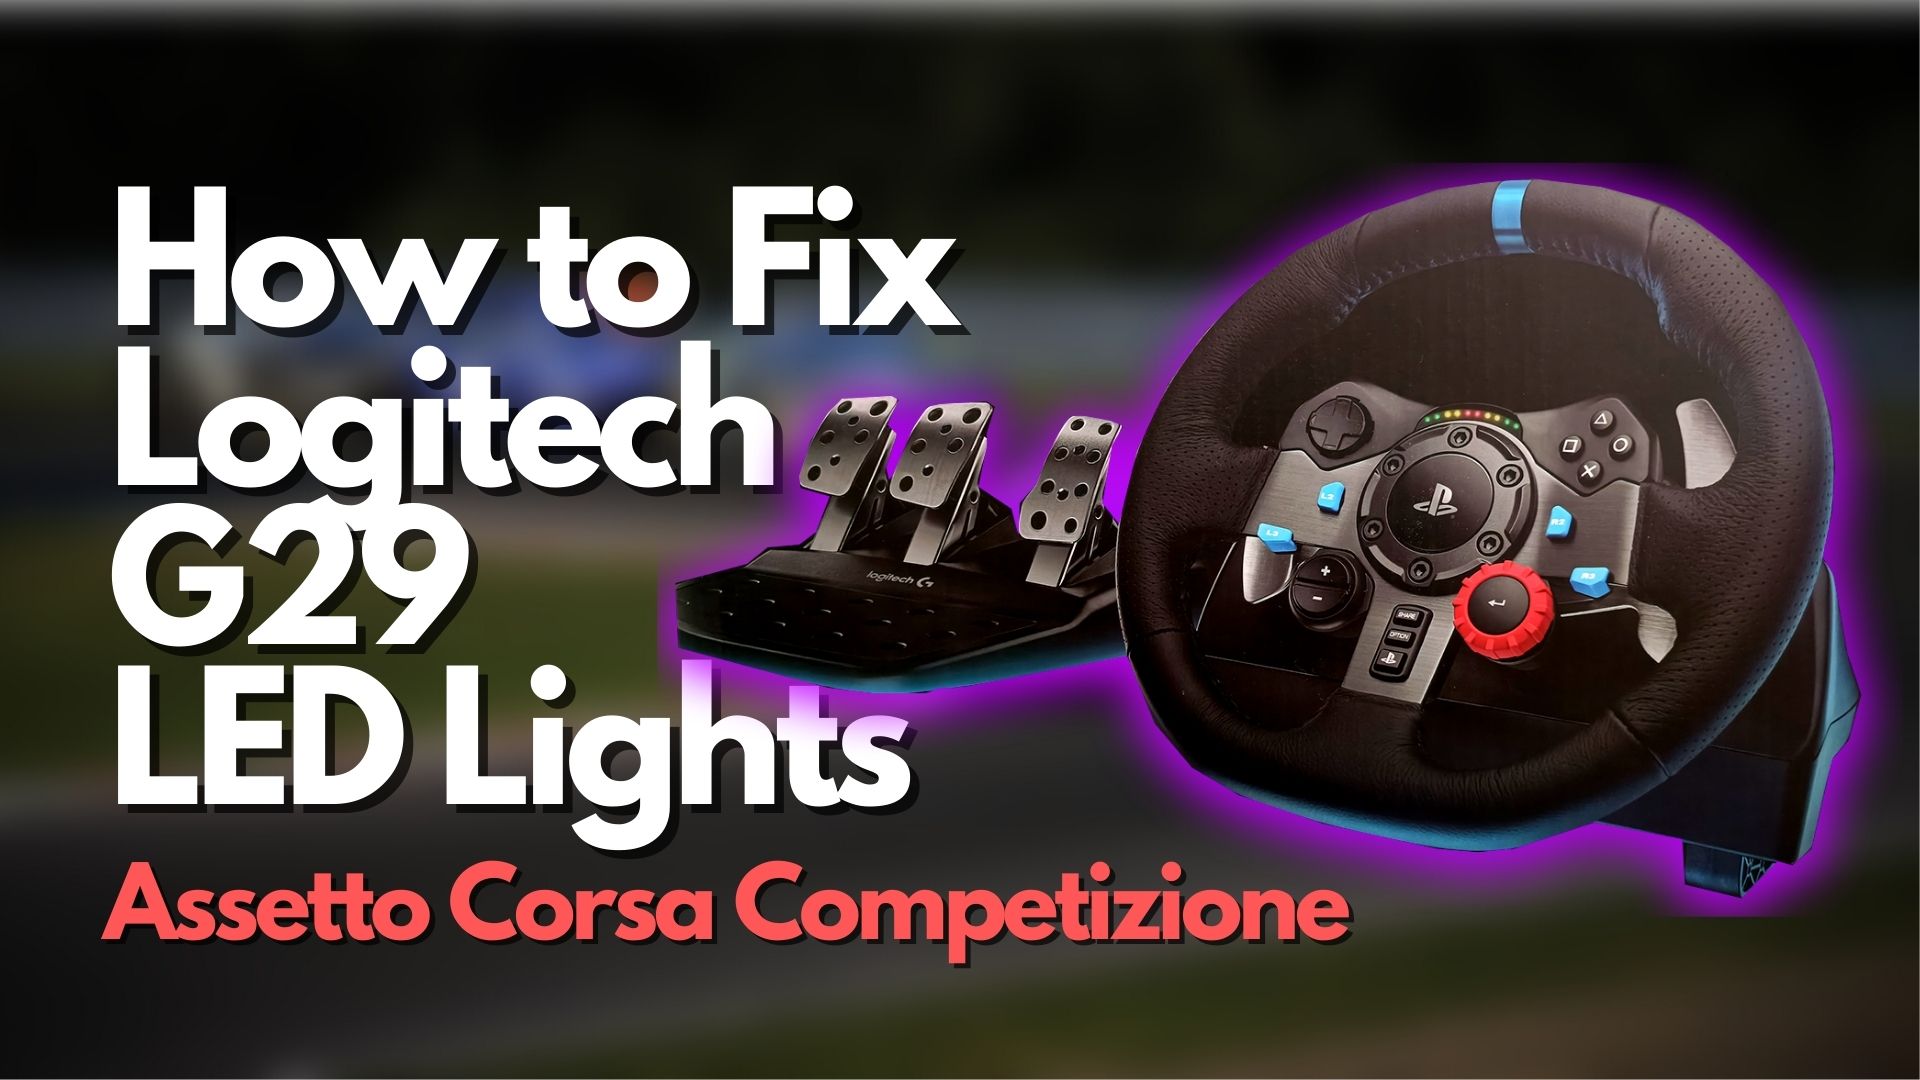 How to Fix Logitech G29 LED Lights Not Working on Assetto Corsa Competizione